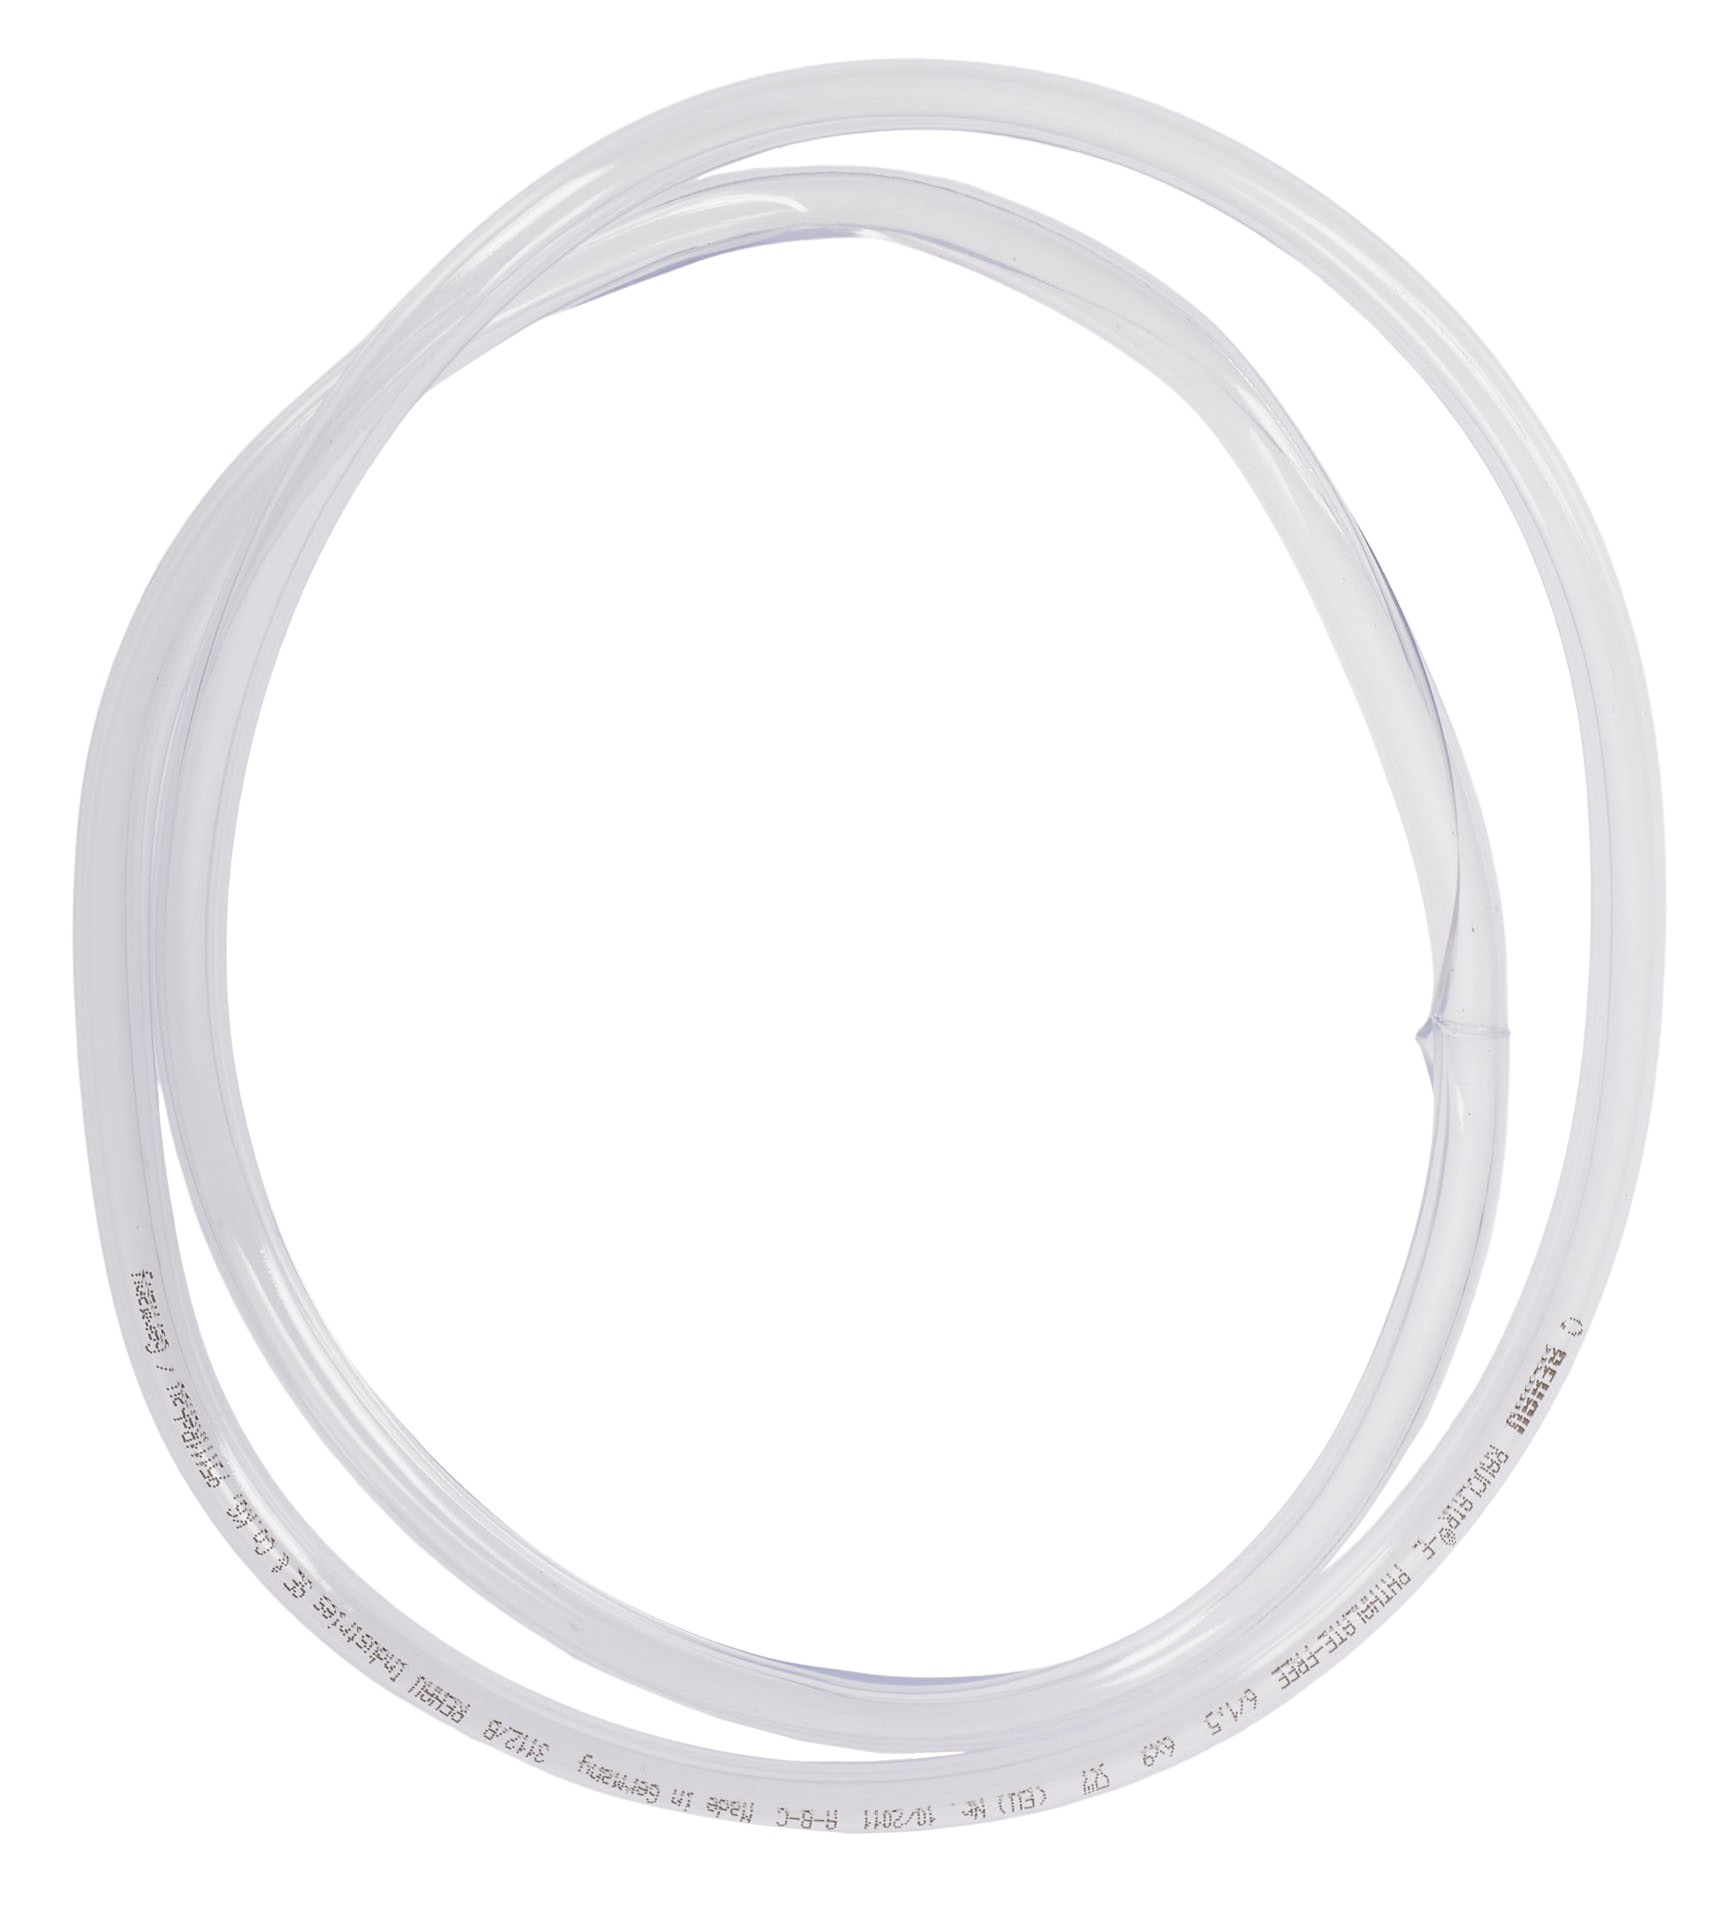 Arnolds & Sons Bell Rim Protectors 400mm